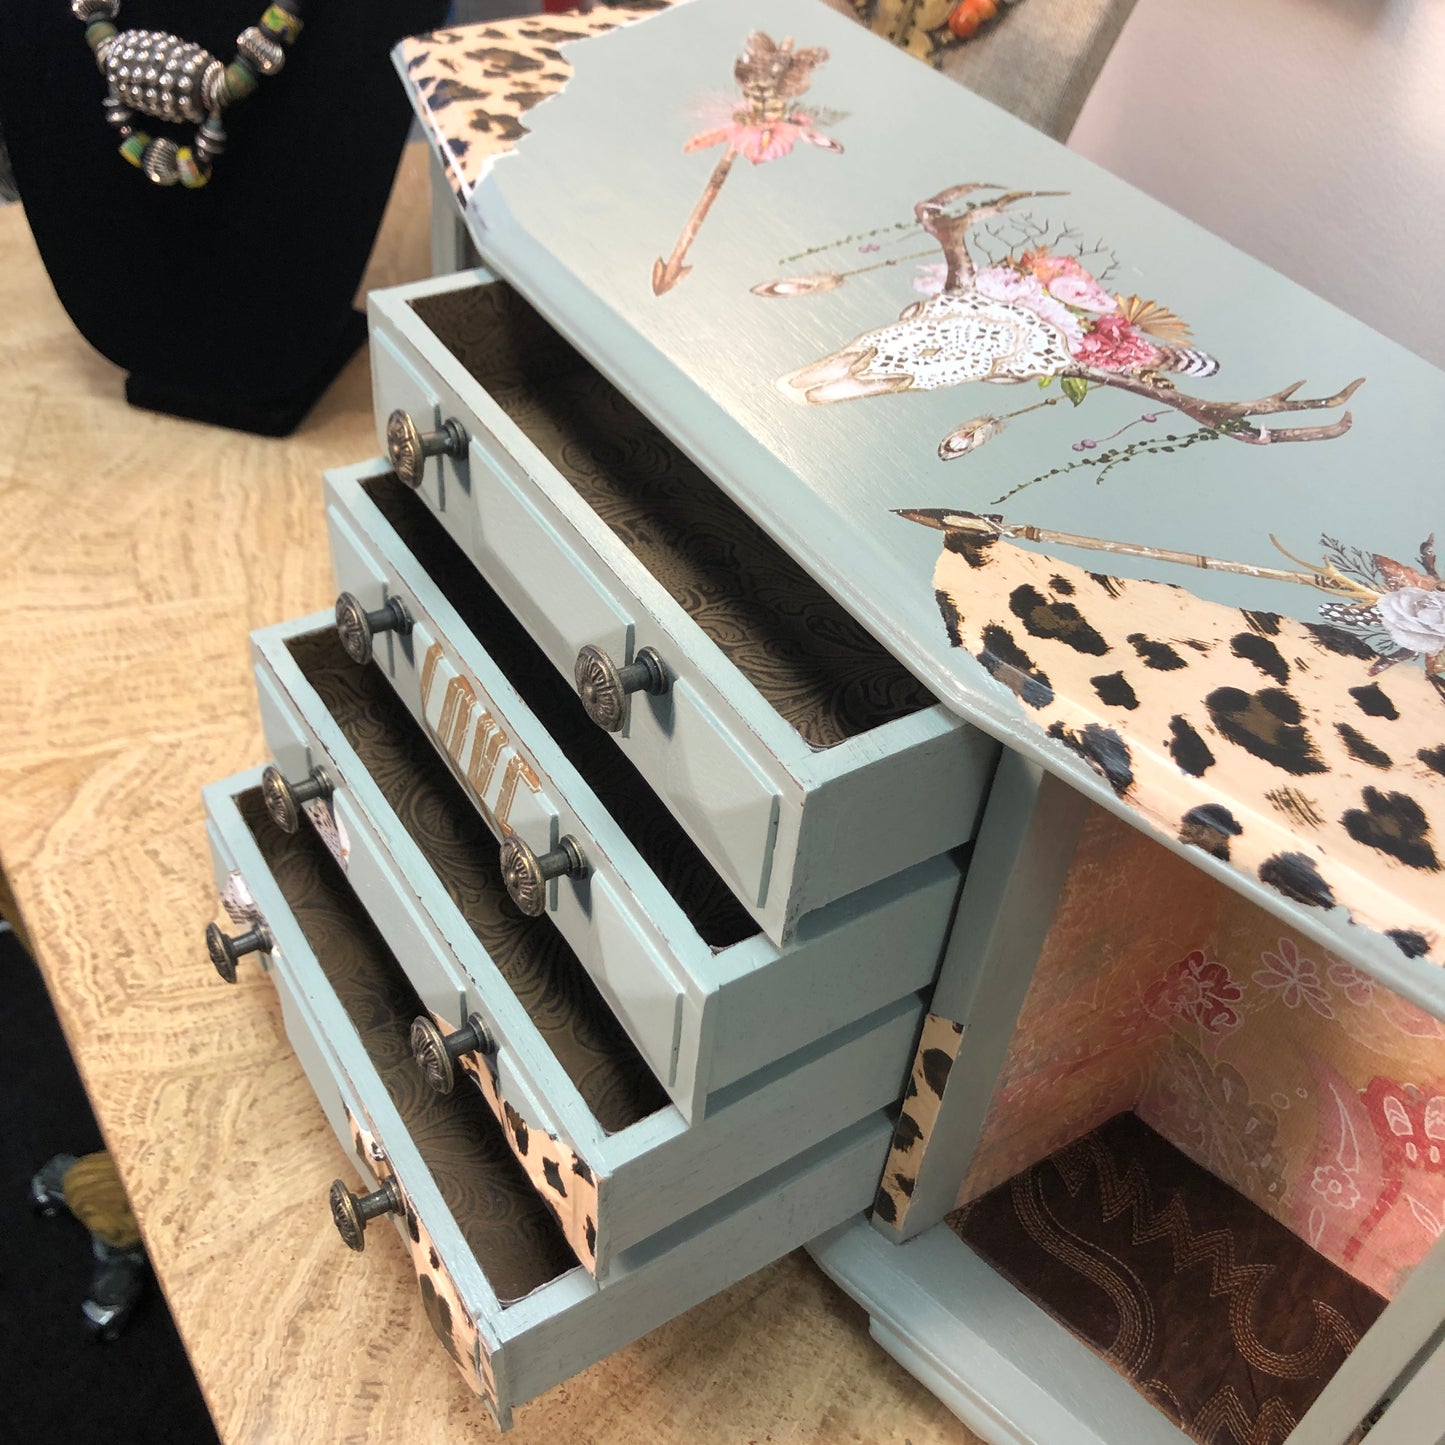 Meet Cowgirl, Table Top Jewelry Box